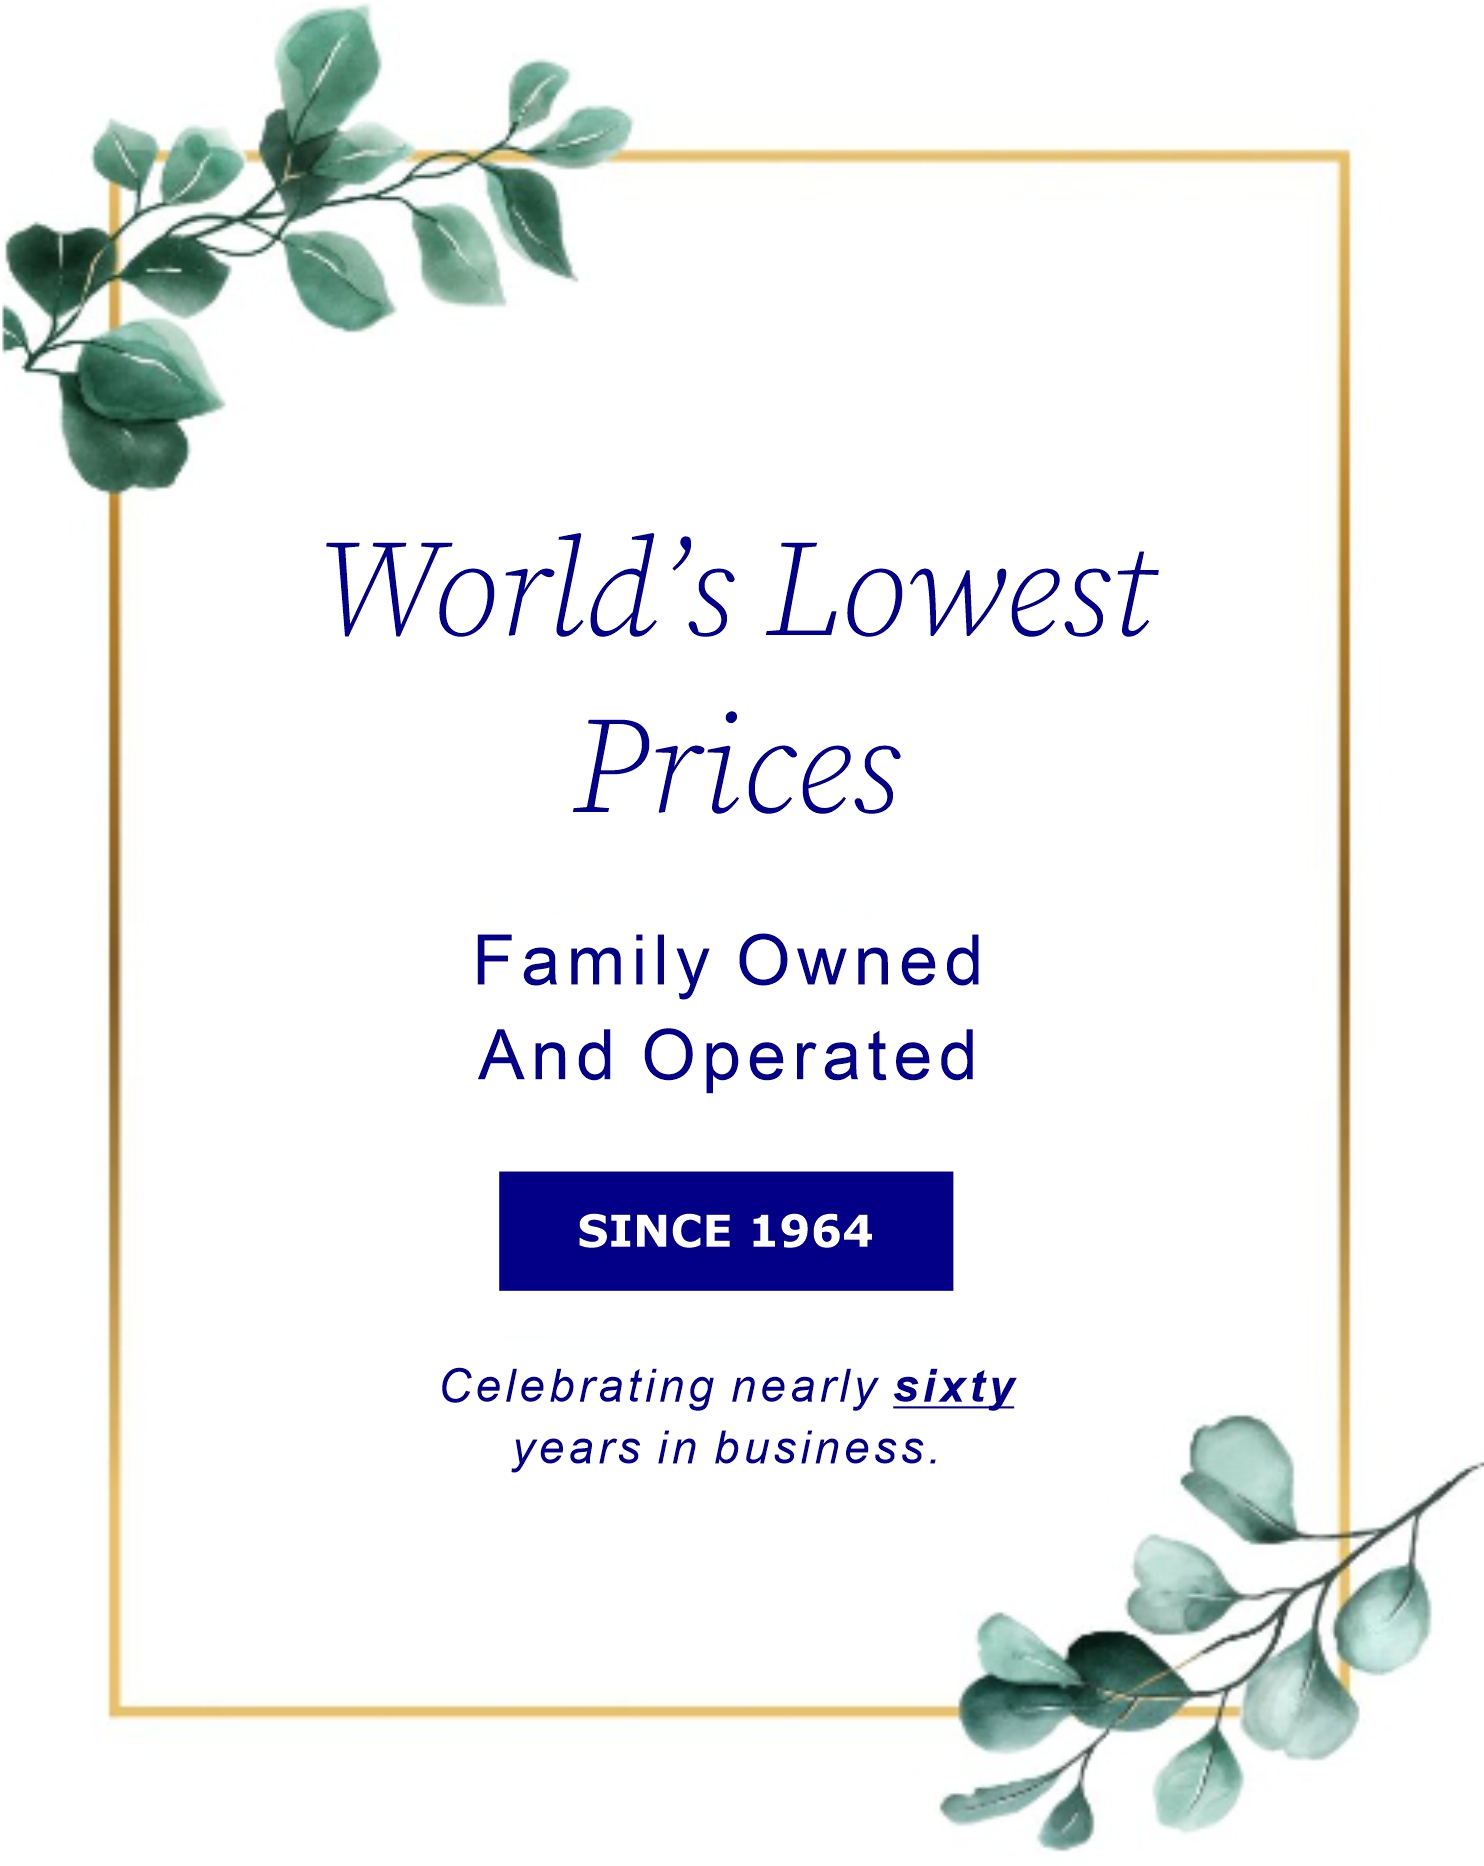 World's Lowest Prices